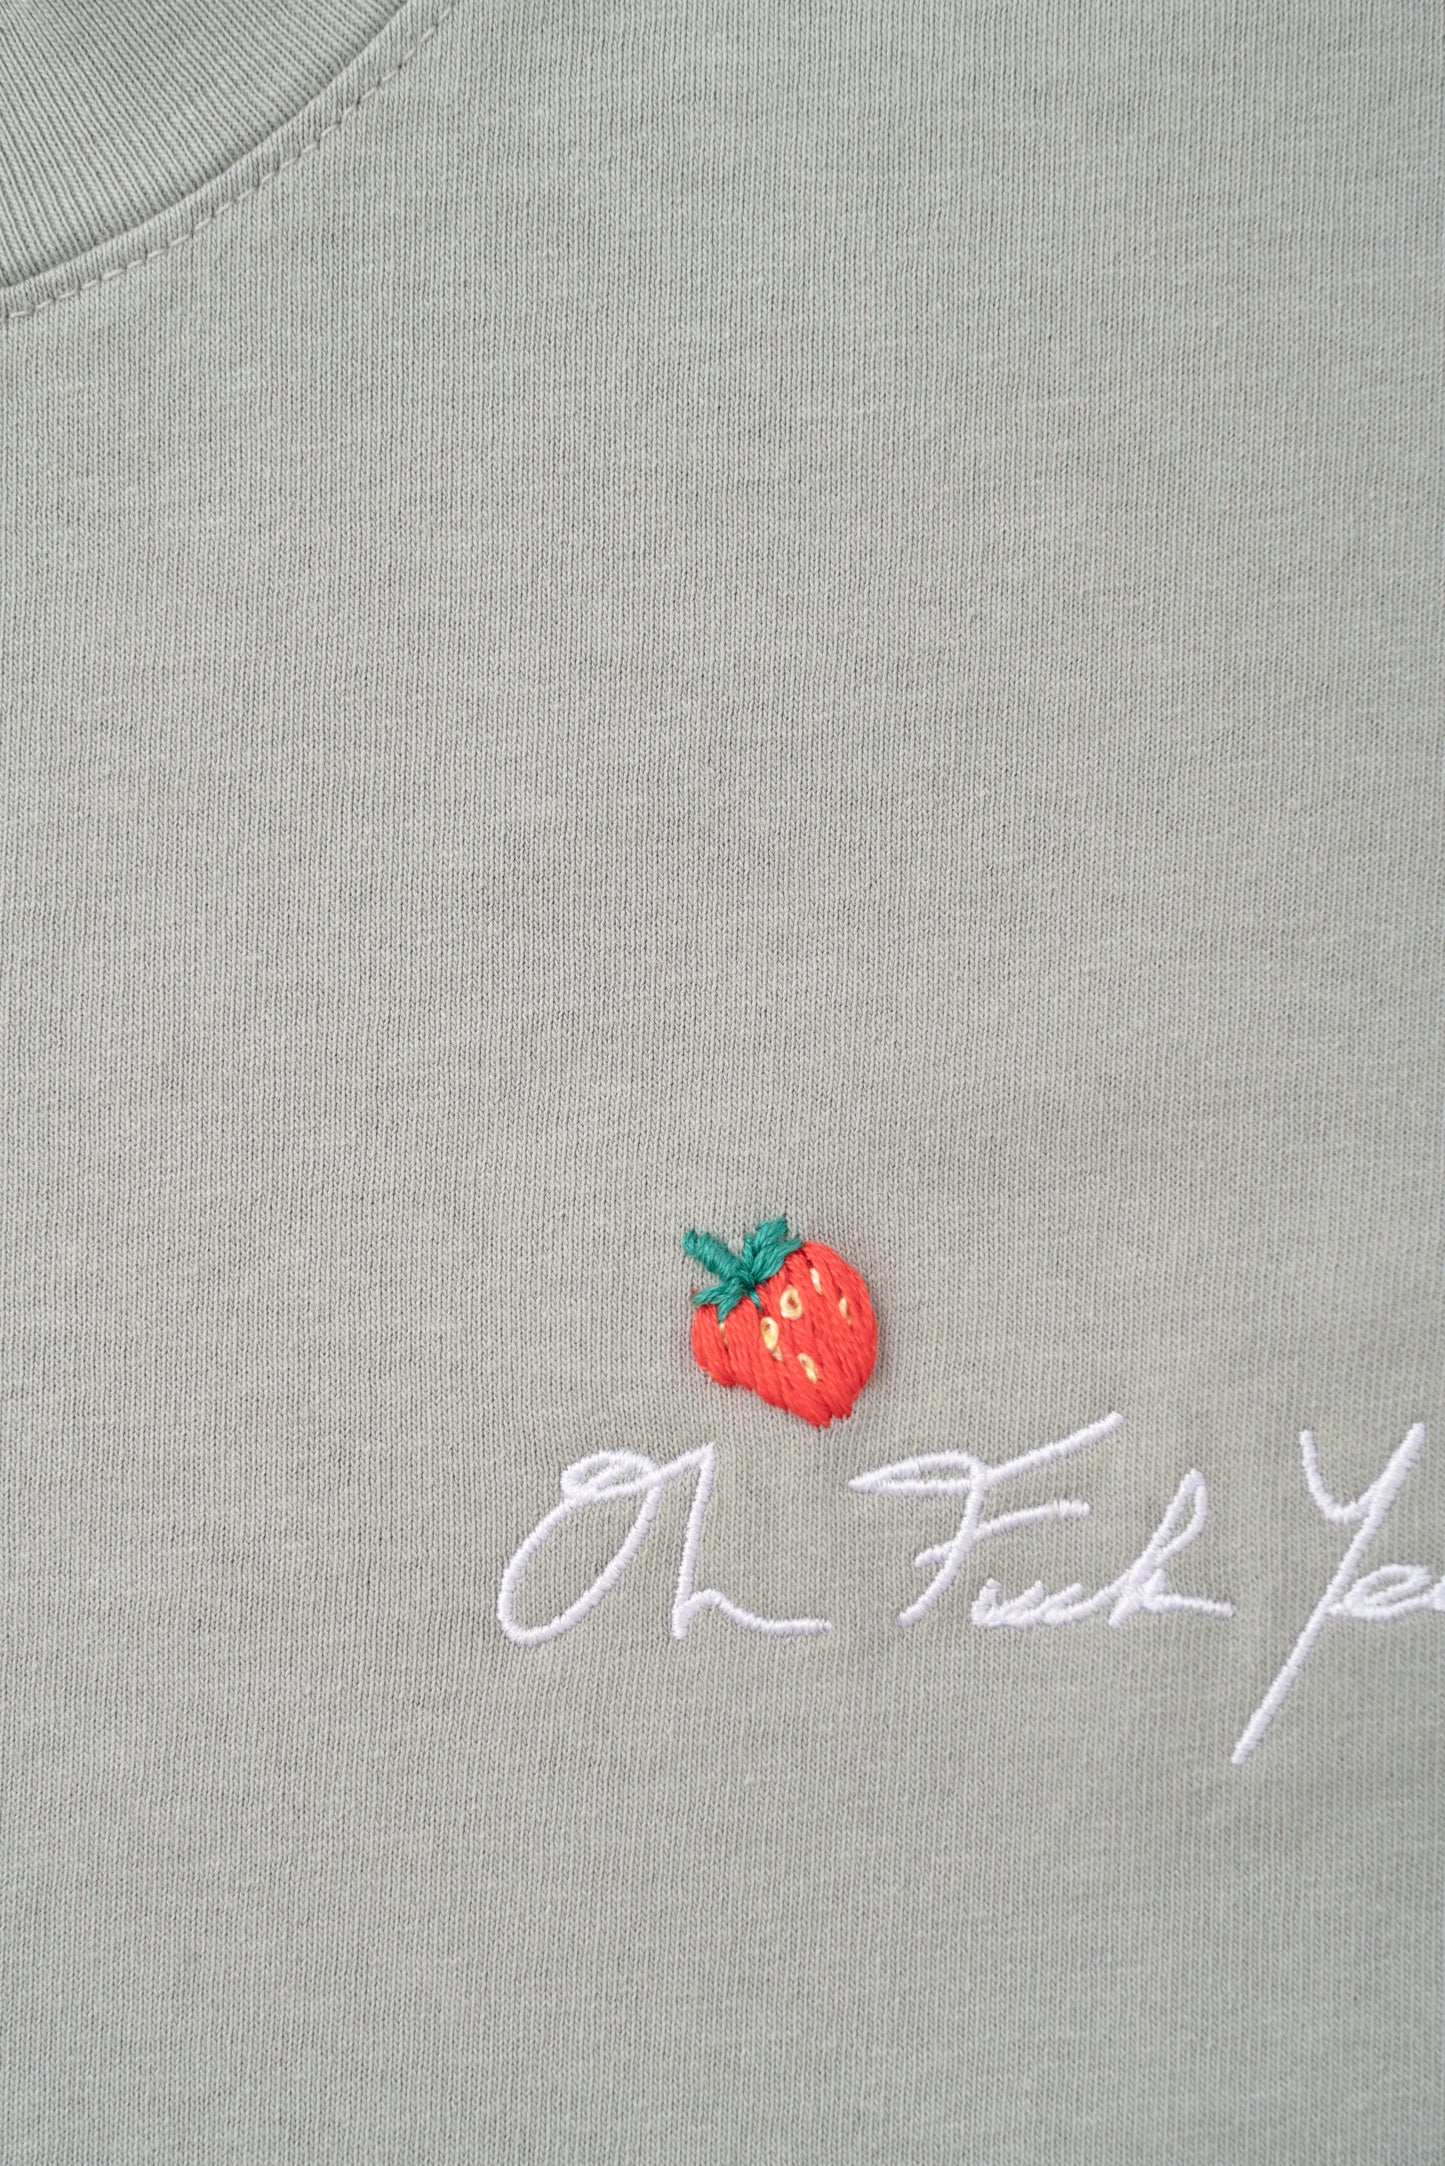 Classic Tee - Strawberry Embroidery